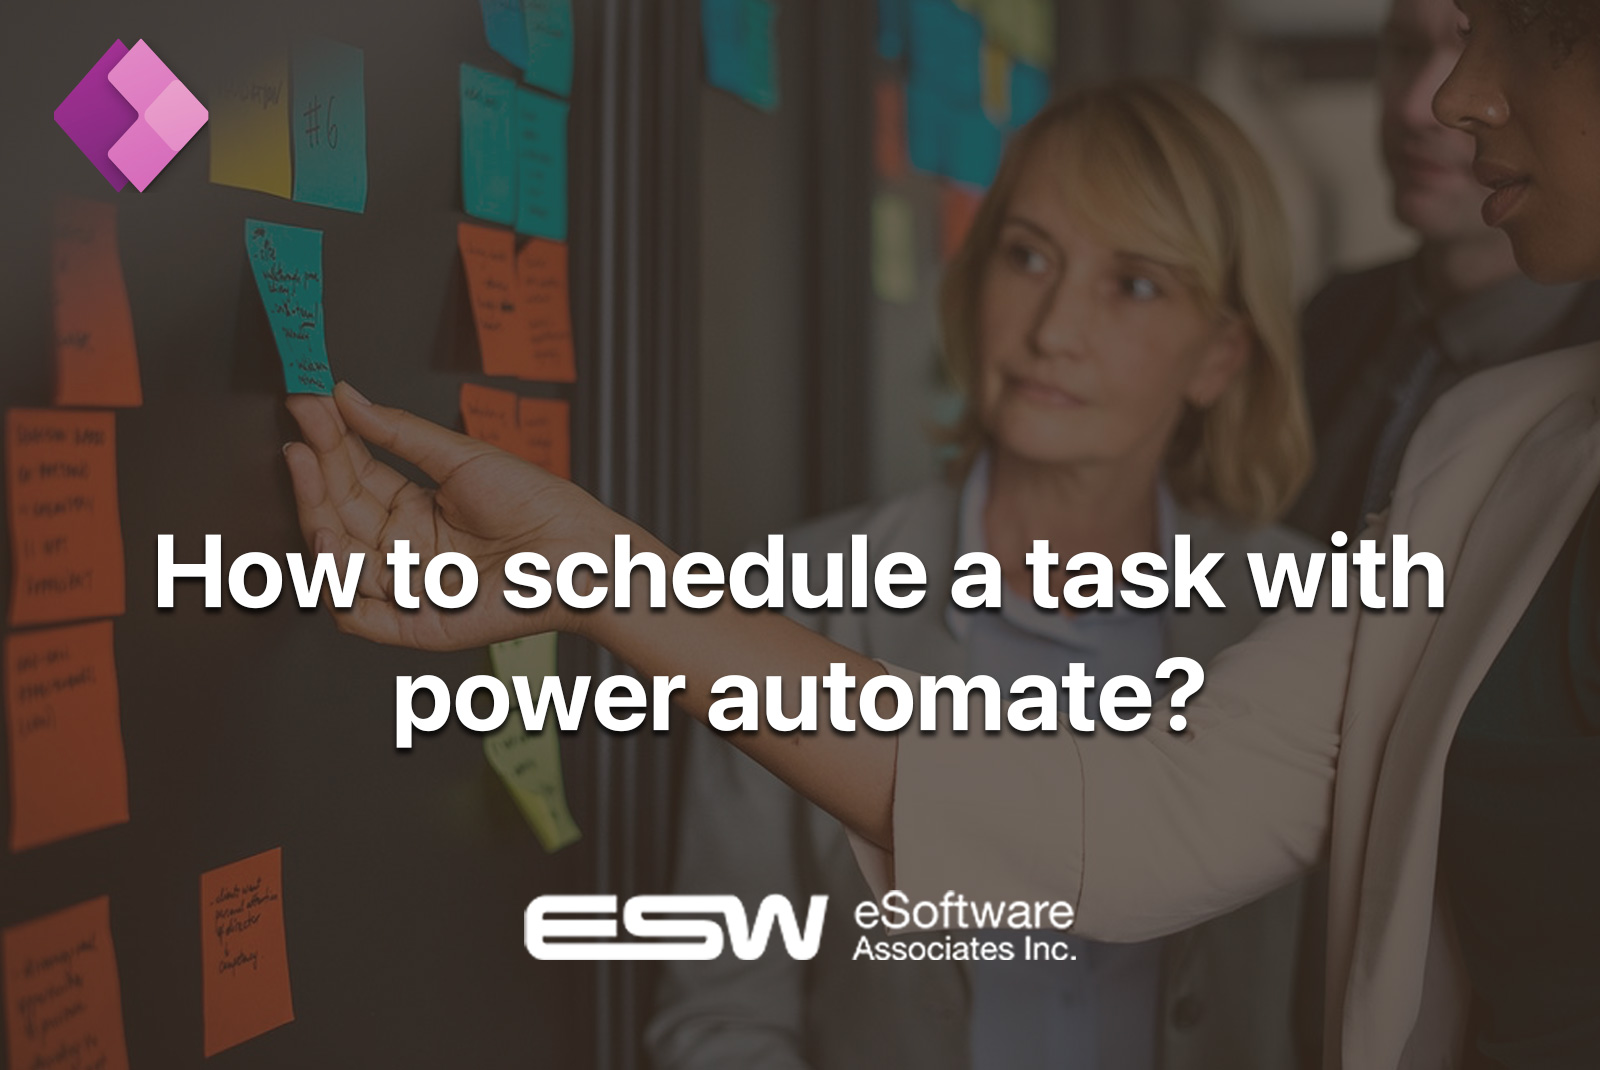 How to schedule a task with power automate? Hire a Microsoft Powerapps Developer to automate tasks and grow your business.